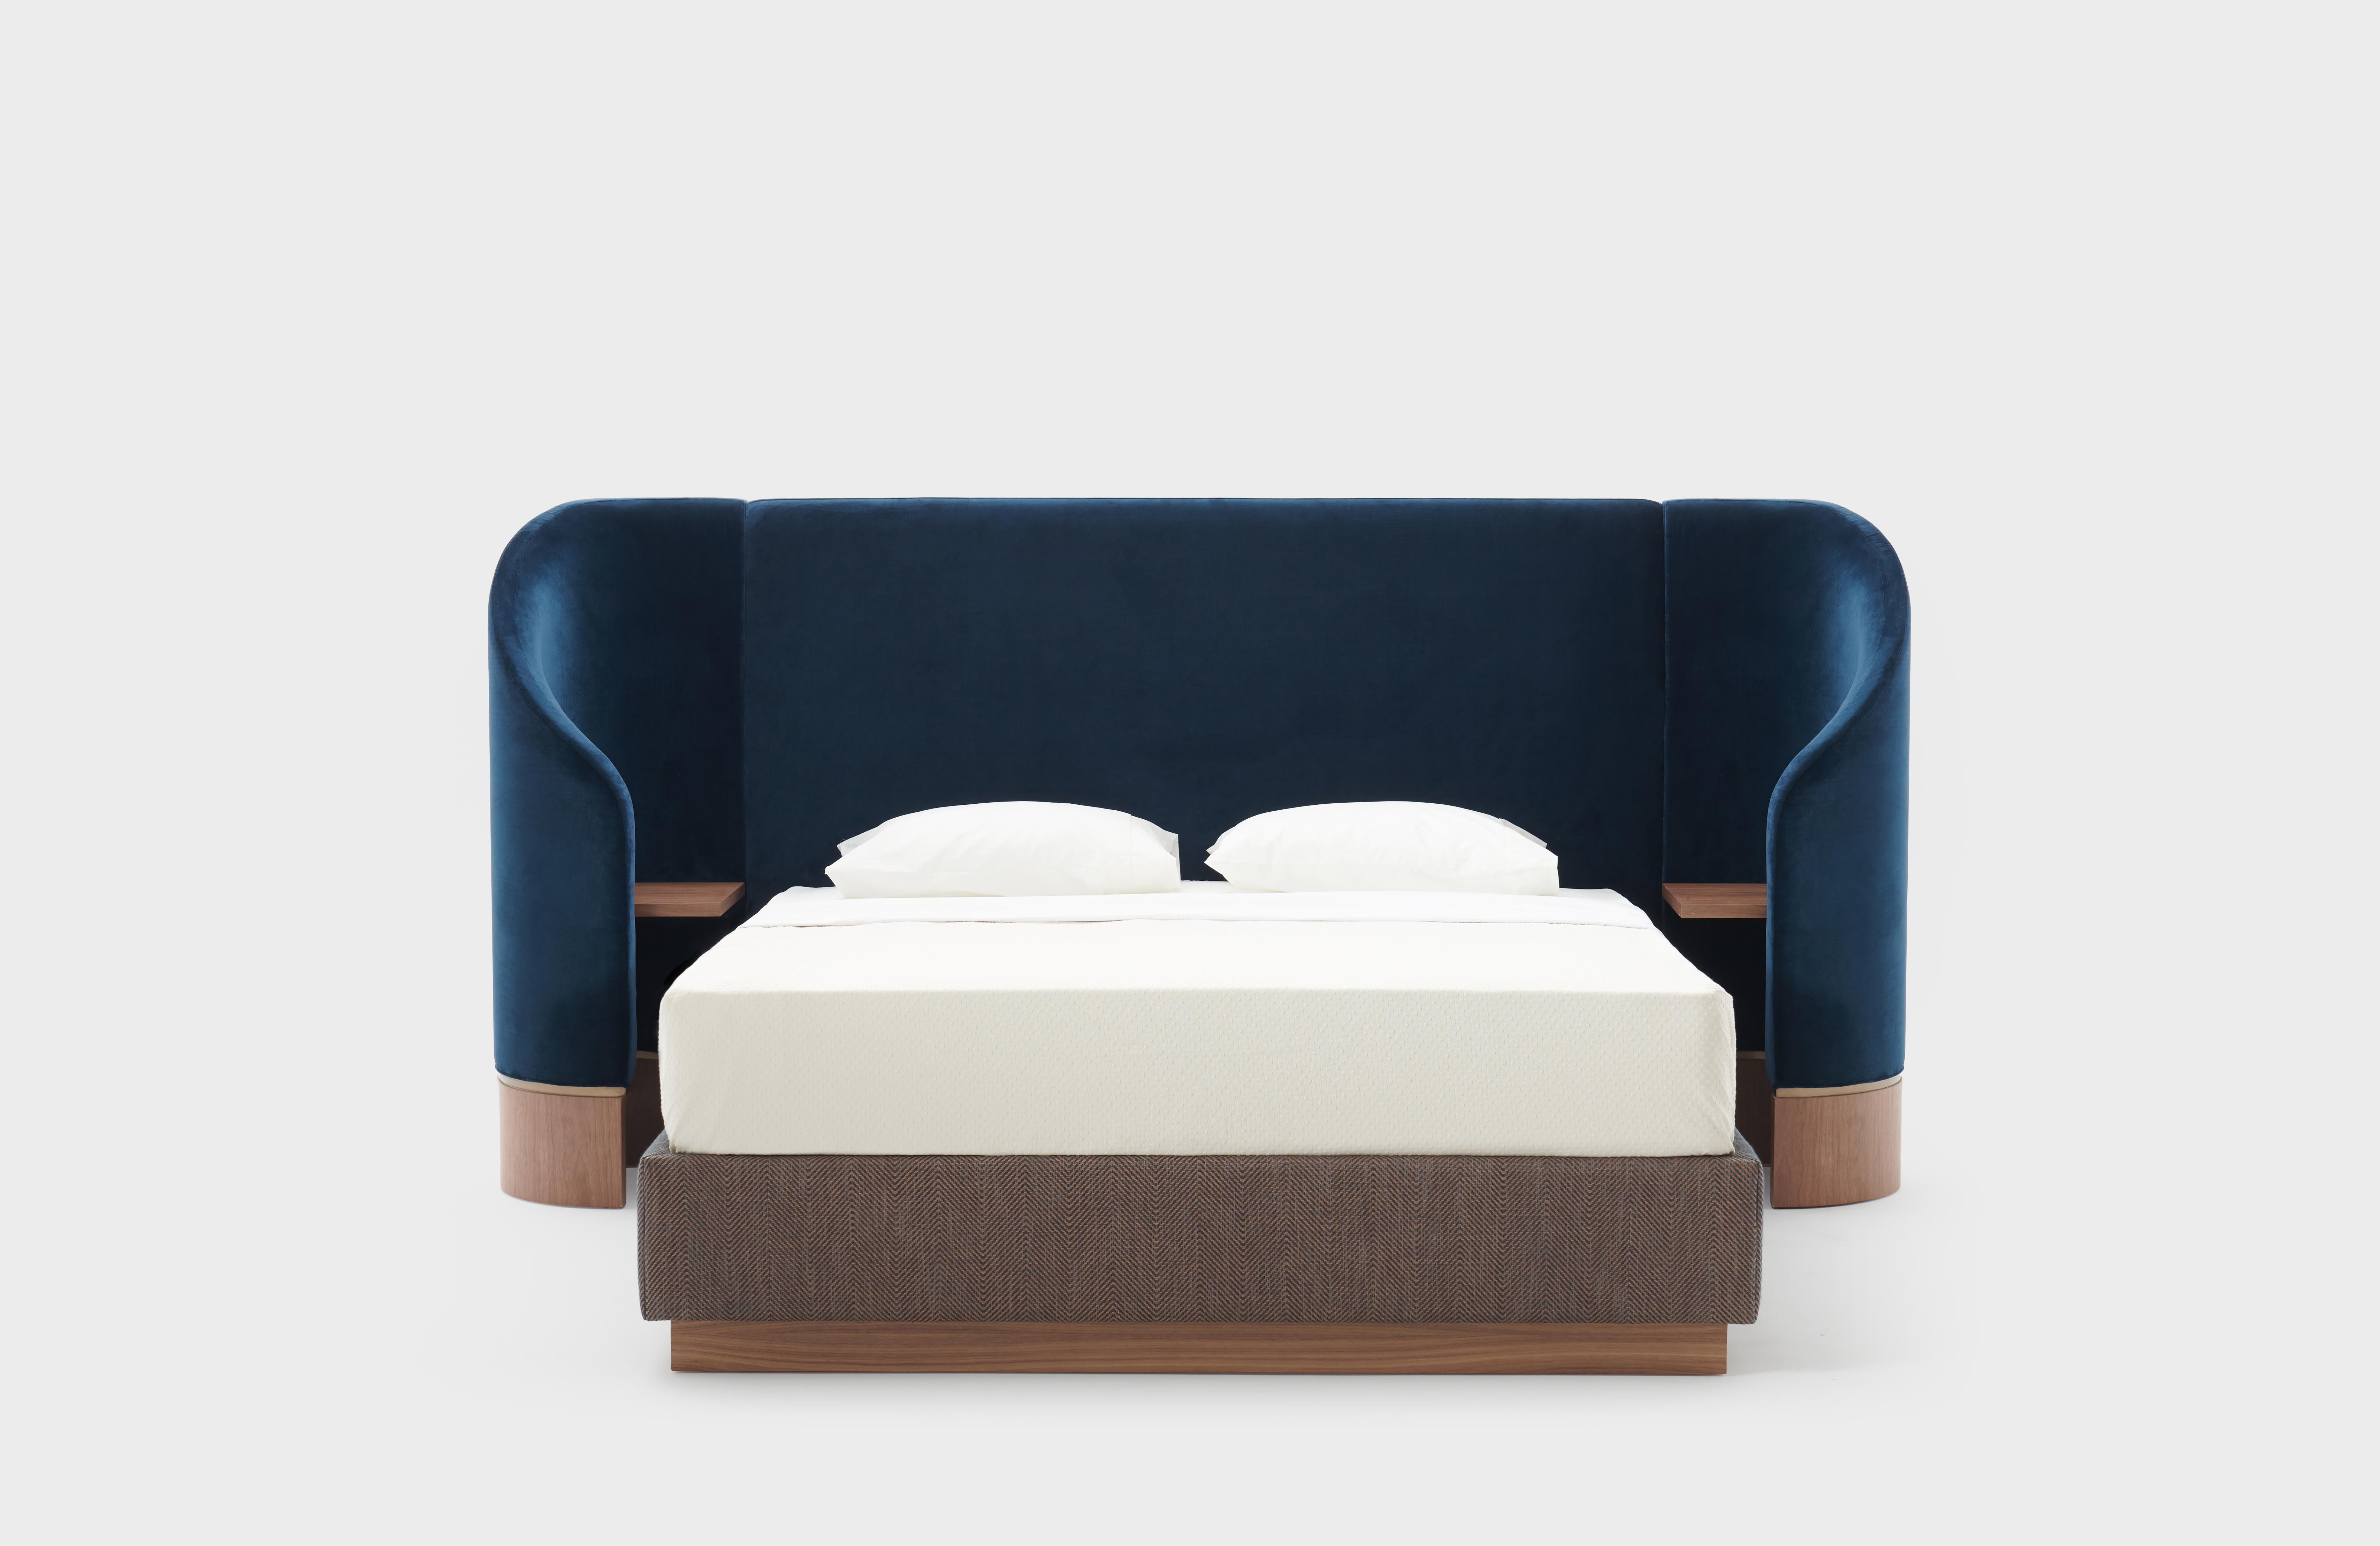 Hug Bed embraces its night time dwellers as they drift asleep within the sanctuary of its wings. 

Inspired by the reflection of the clear night sky against a calm lake, the navy blue fabric mimics the deep relaxing feeling of being in nature.